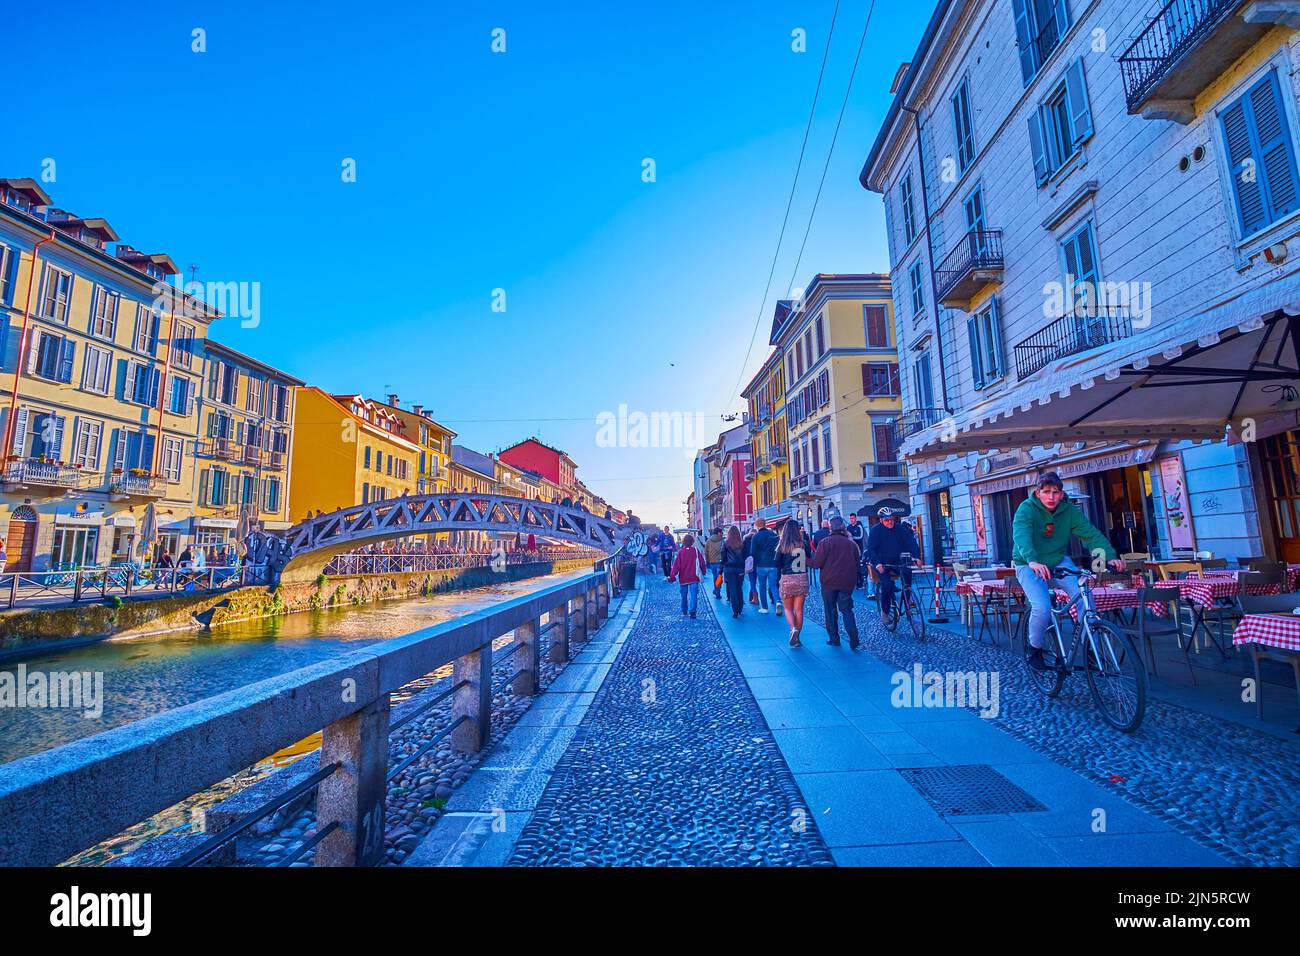 MILAN, ITALY - APRIL 9, 2022: Walk along Naviglio Grande Canal, the popular leisure place among locals, on April 9 in Milan, Italy Stock Photo